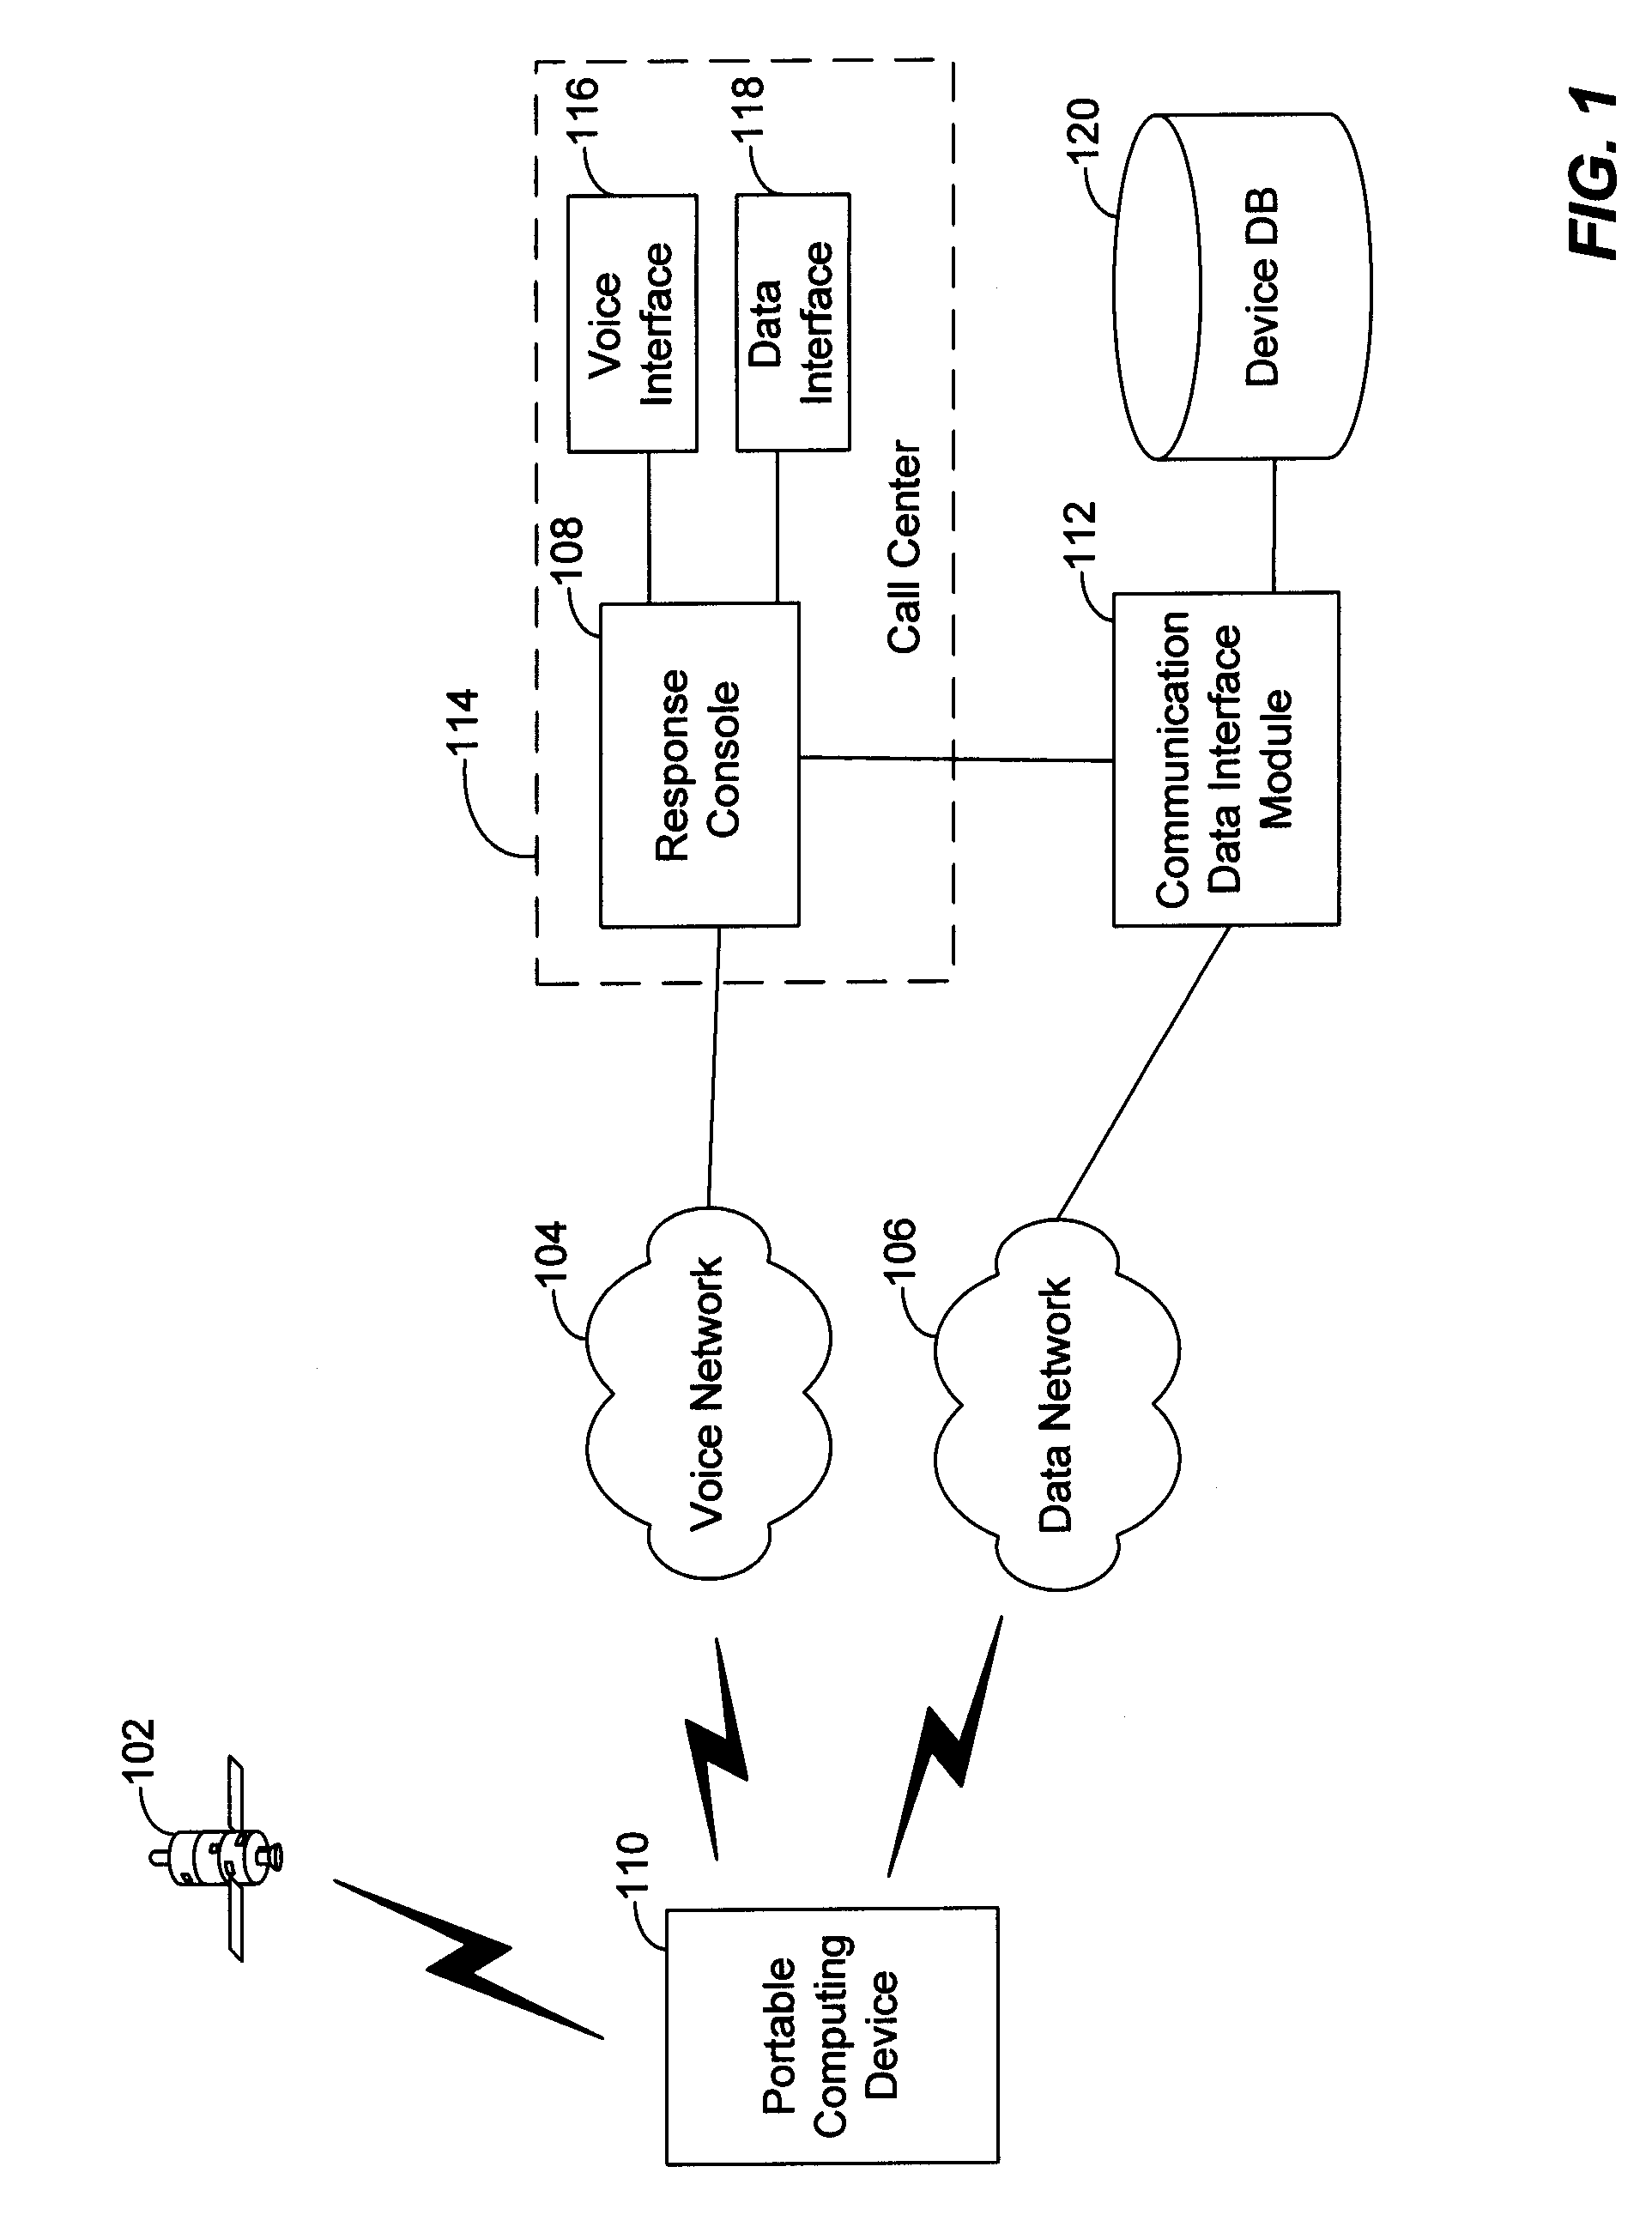 Method and system for providing location updates